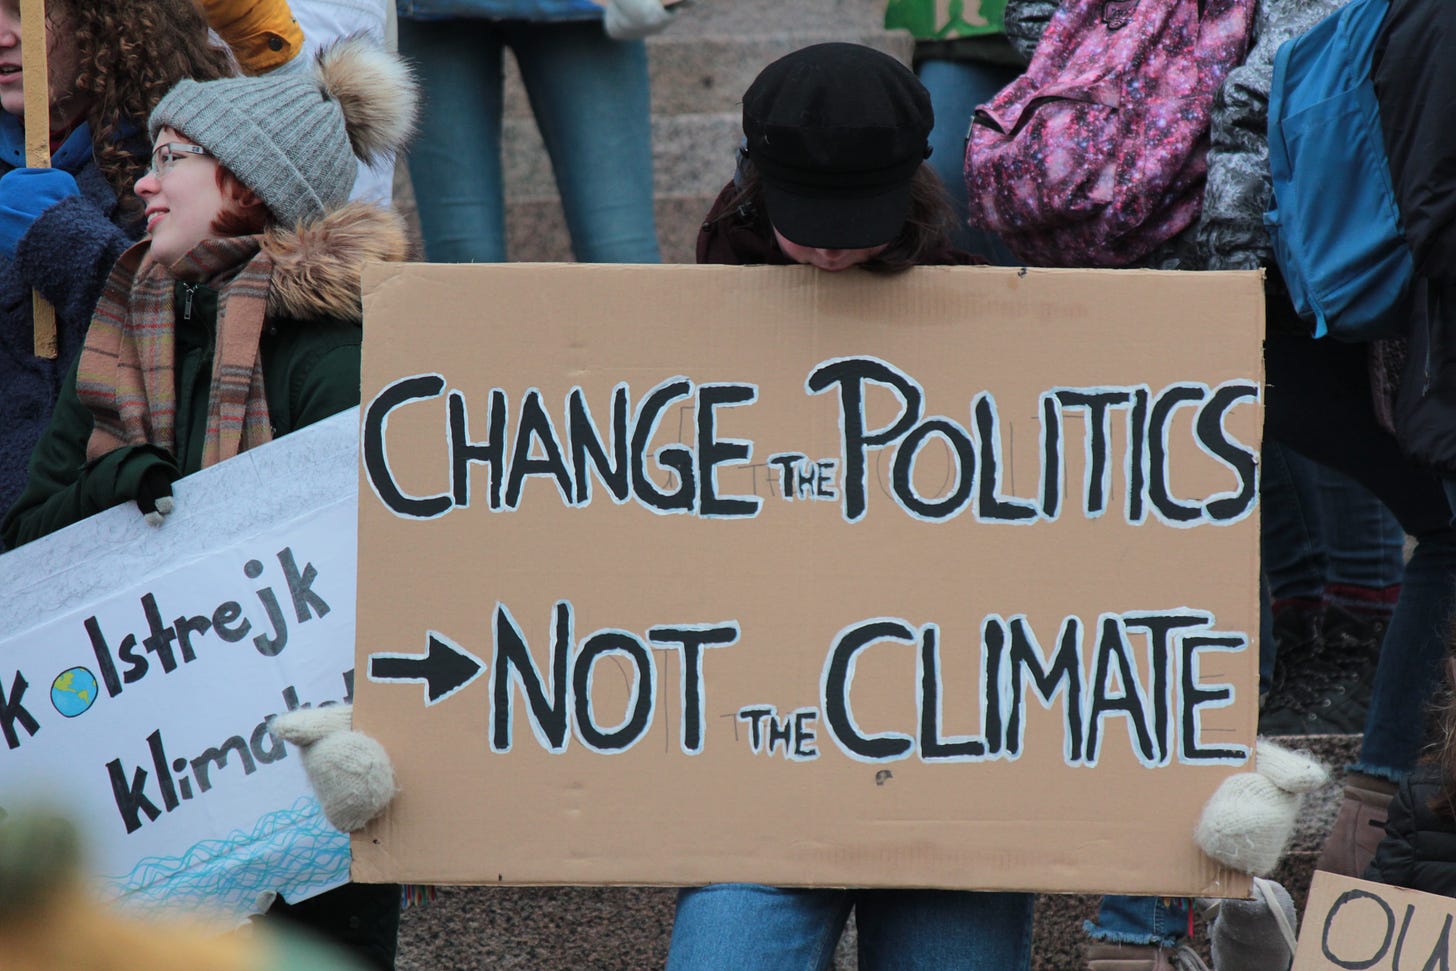 A protester at a rally is holding a cardboard sign, "Change the politics, not the climate"